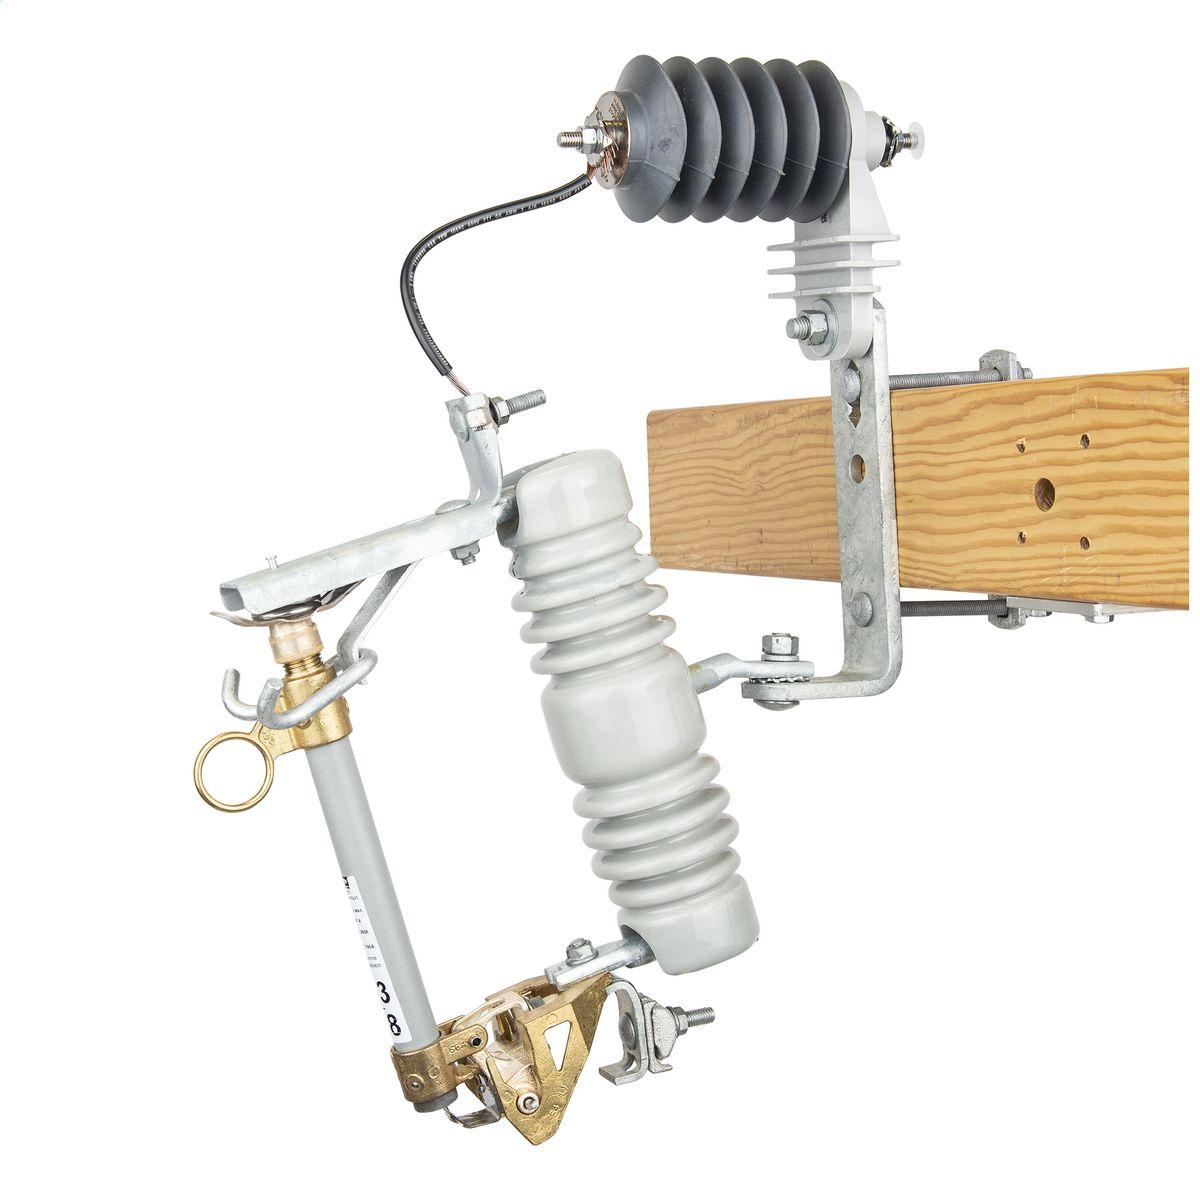 Hubbell C71DL133PB 15 kV, 110 kV BIL, Standard Type C Porcelain Cutout / Arrester Combination with a 300A solid blade, parallel-groove connector and a NEMA "B" crossarm bracket. 